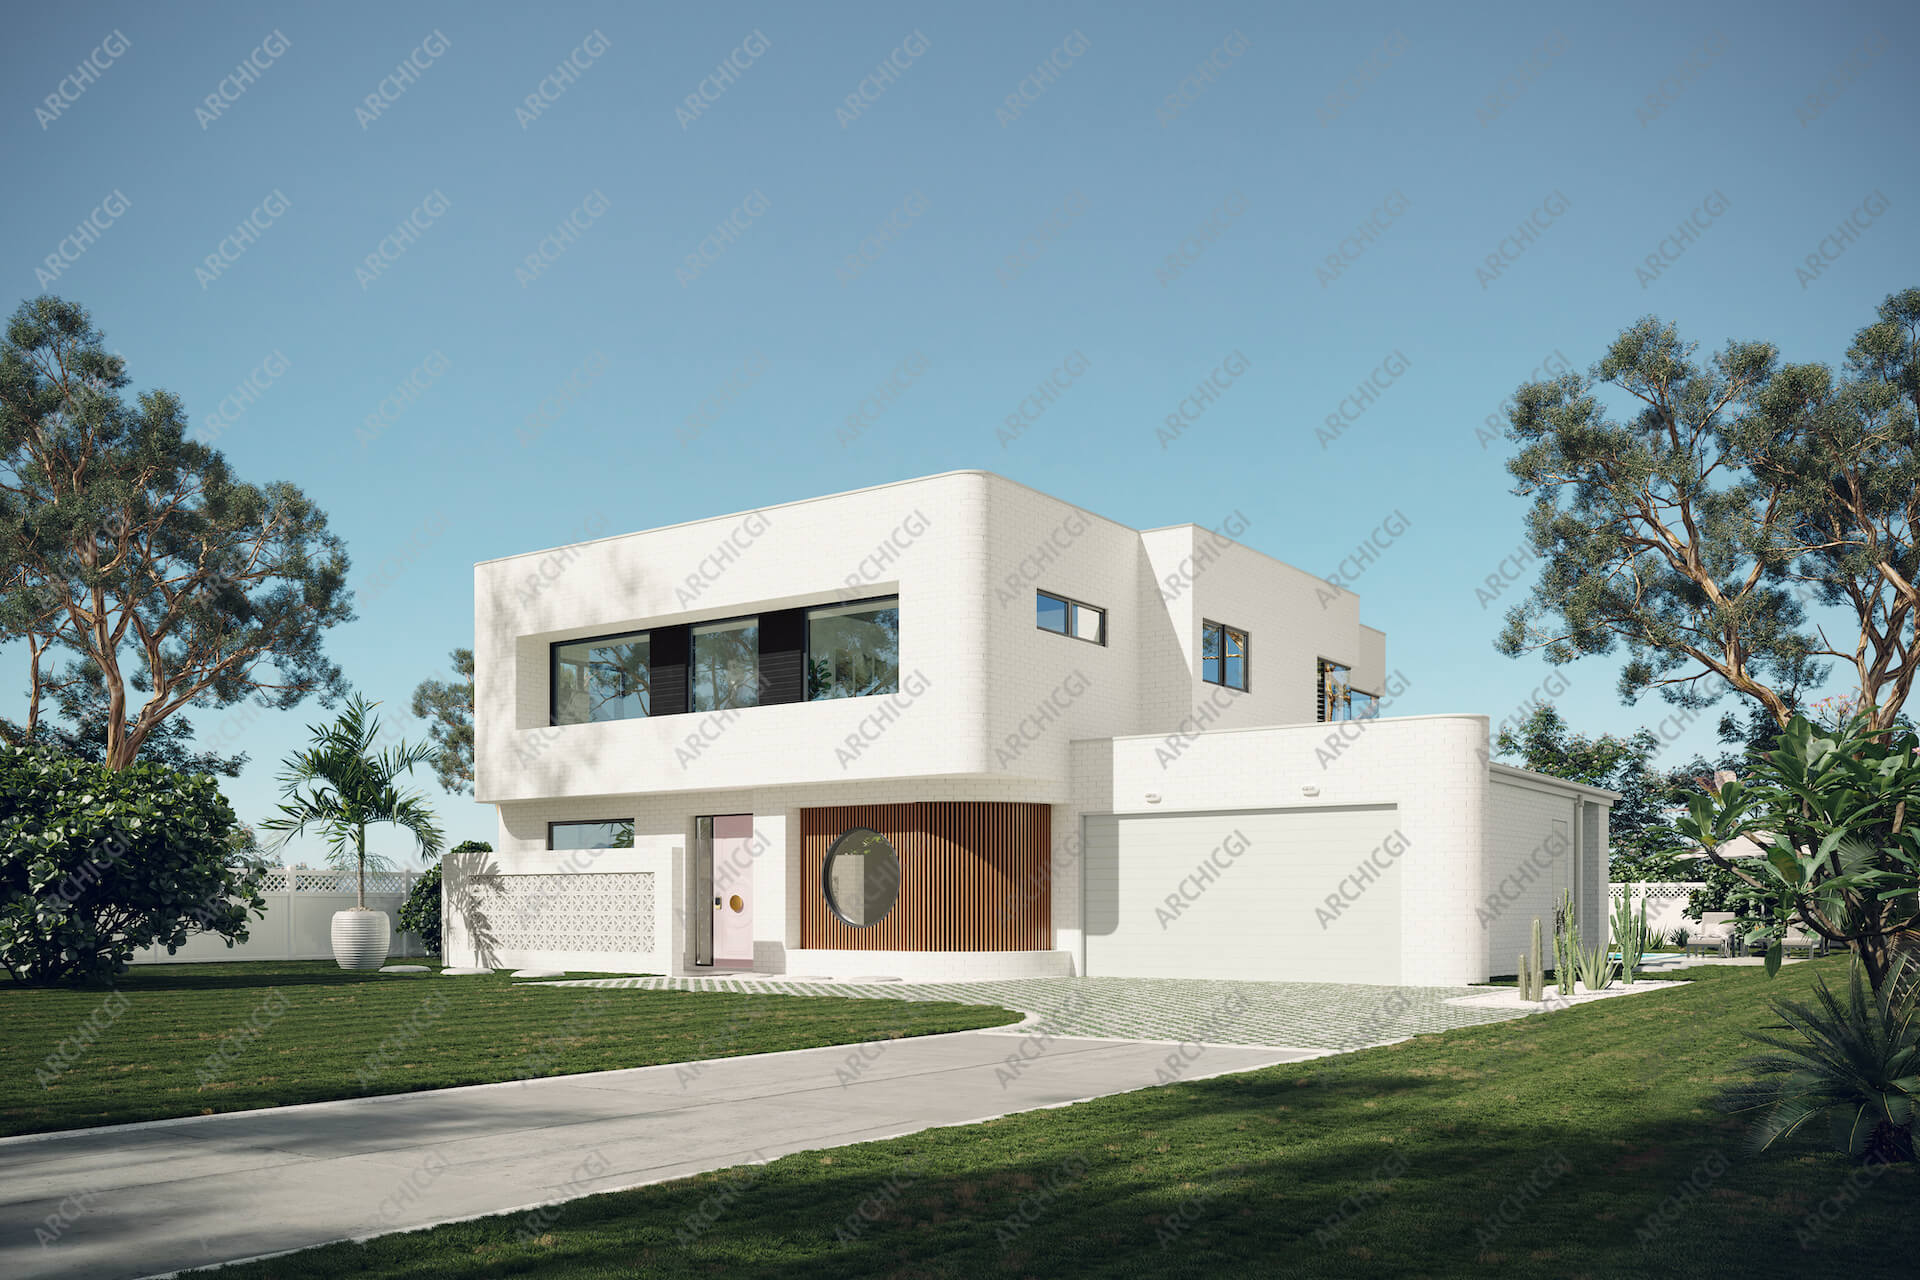 Final CG Image of the House Exterior with Watermark